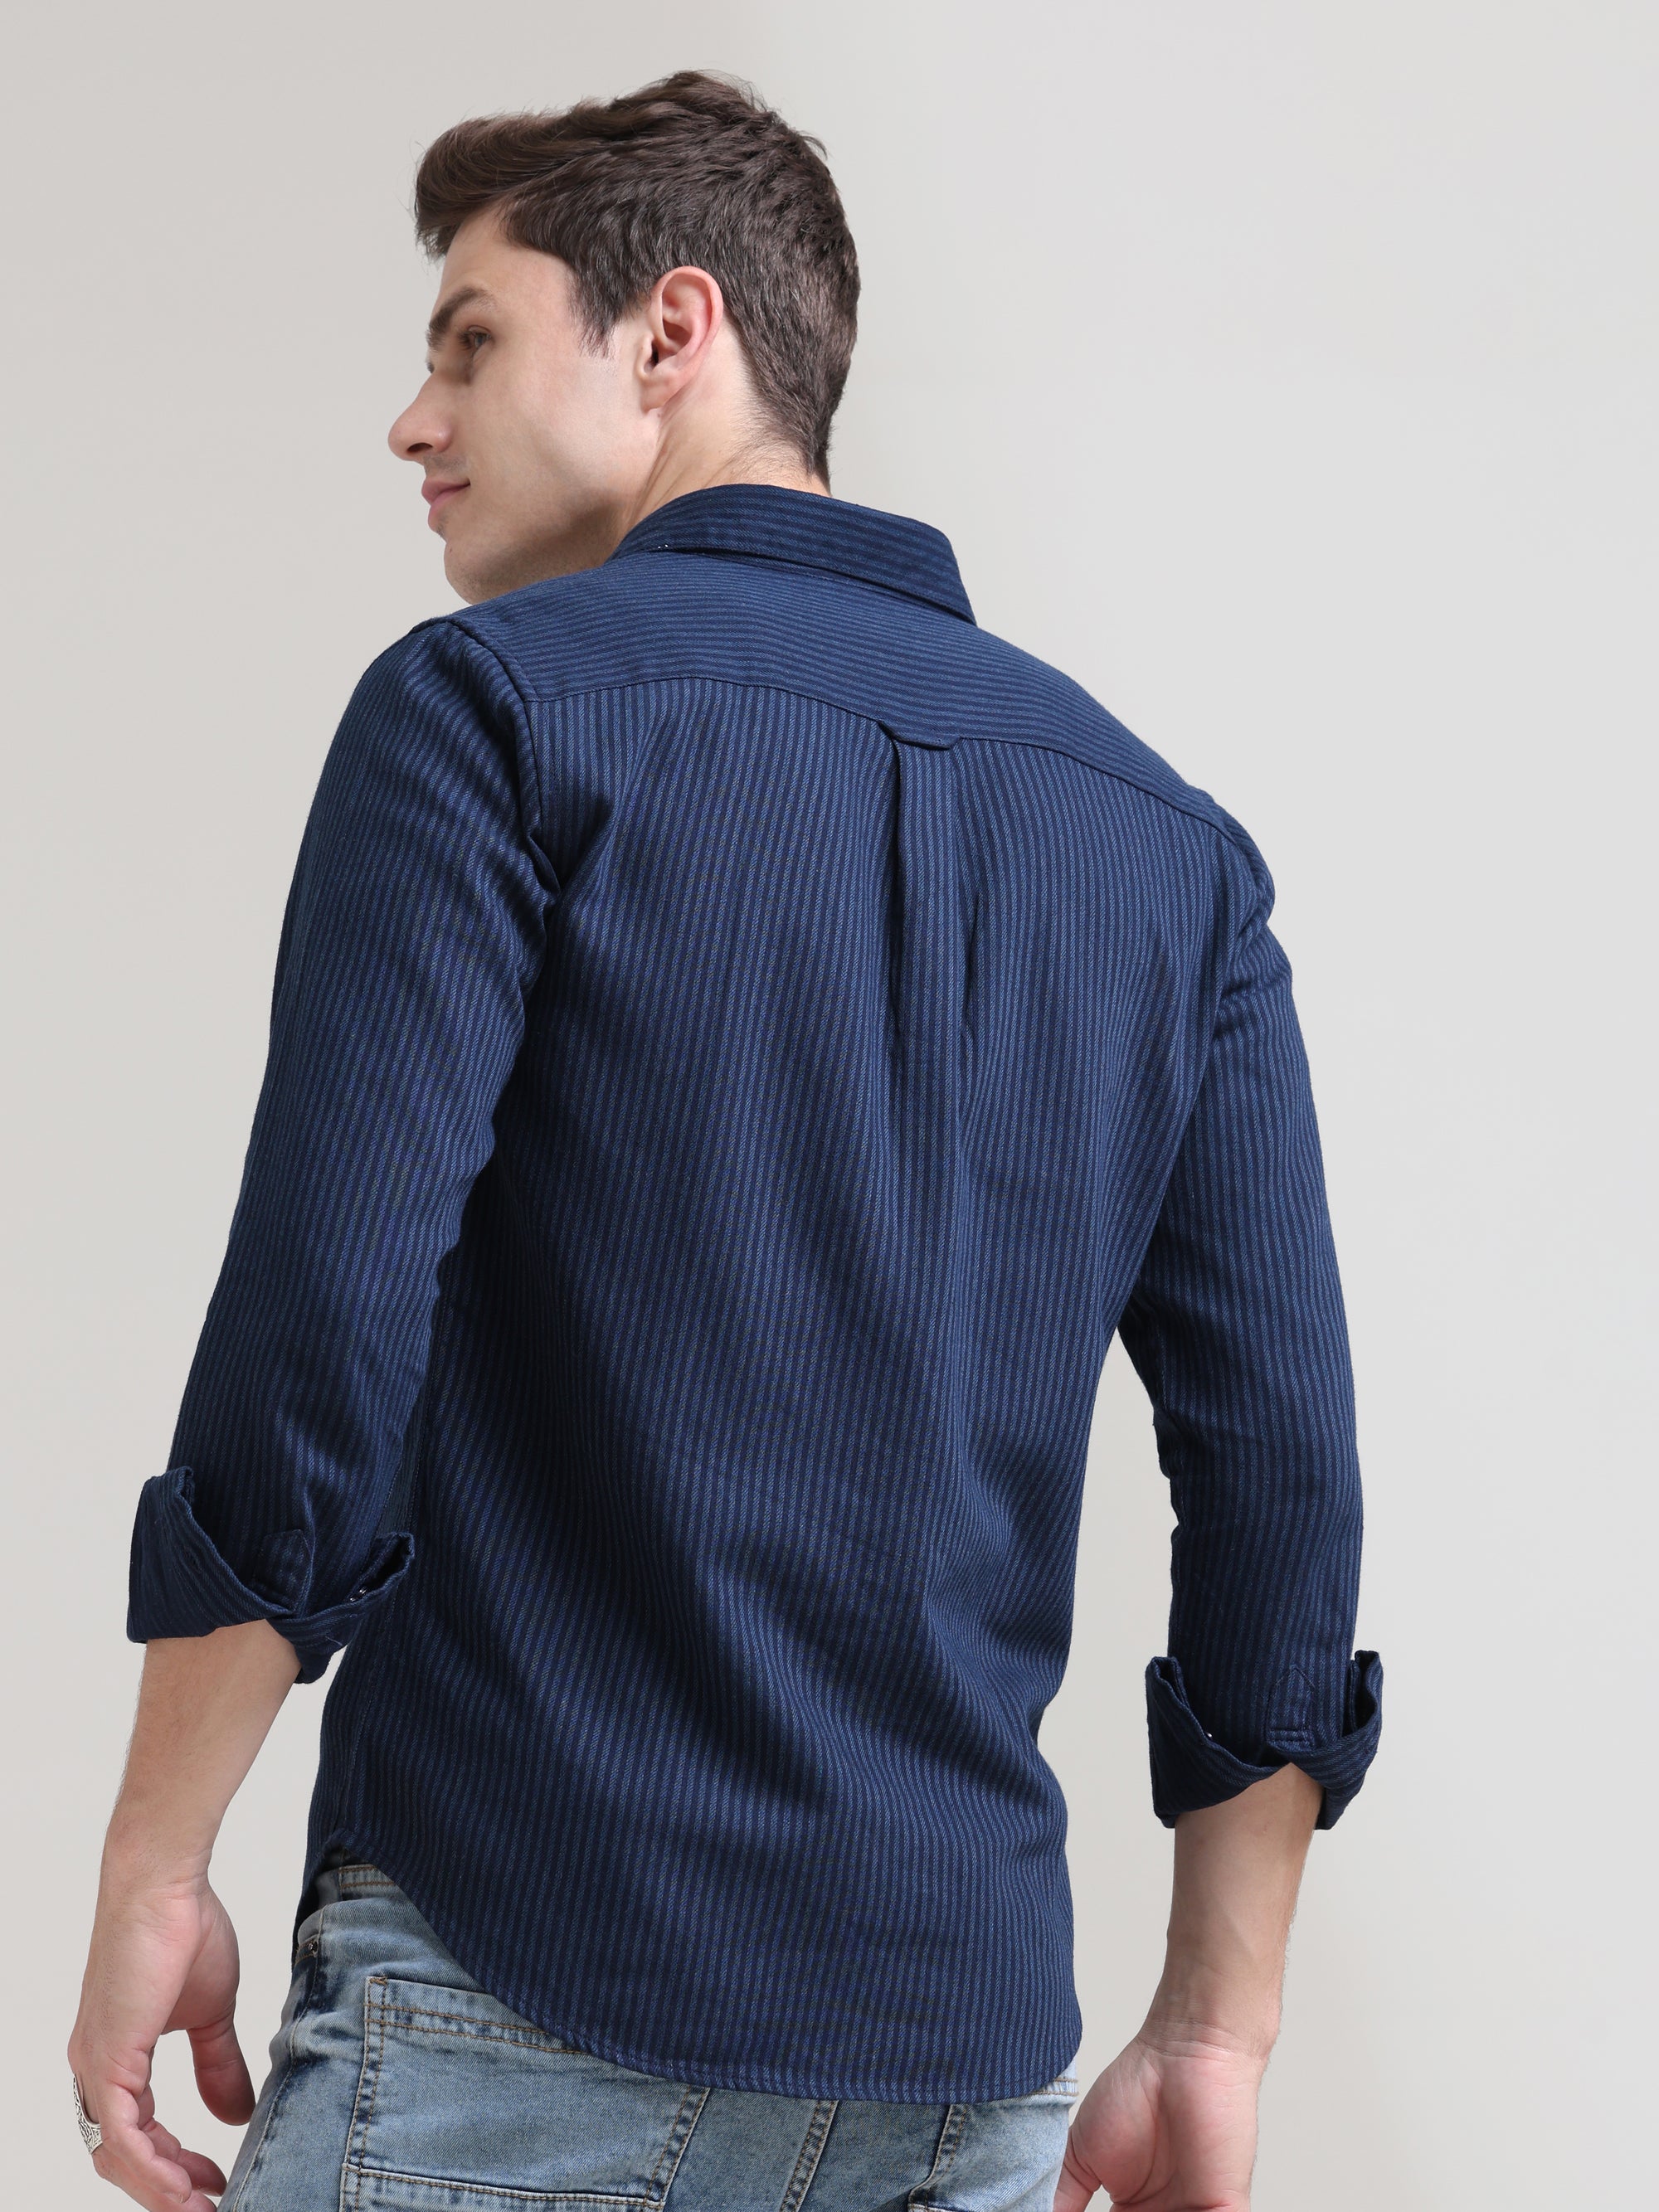 Midnight Elegance: Solid Navy Blue Tapered Fit Full Sleeve Shirt